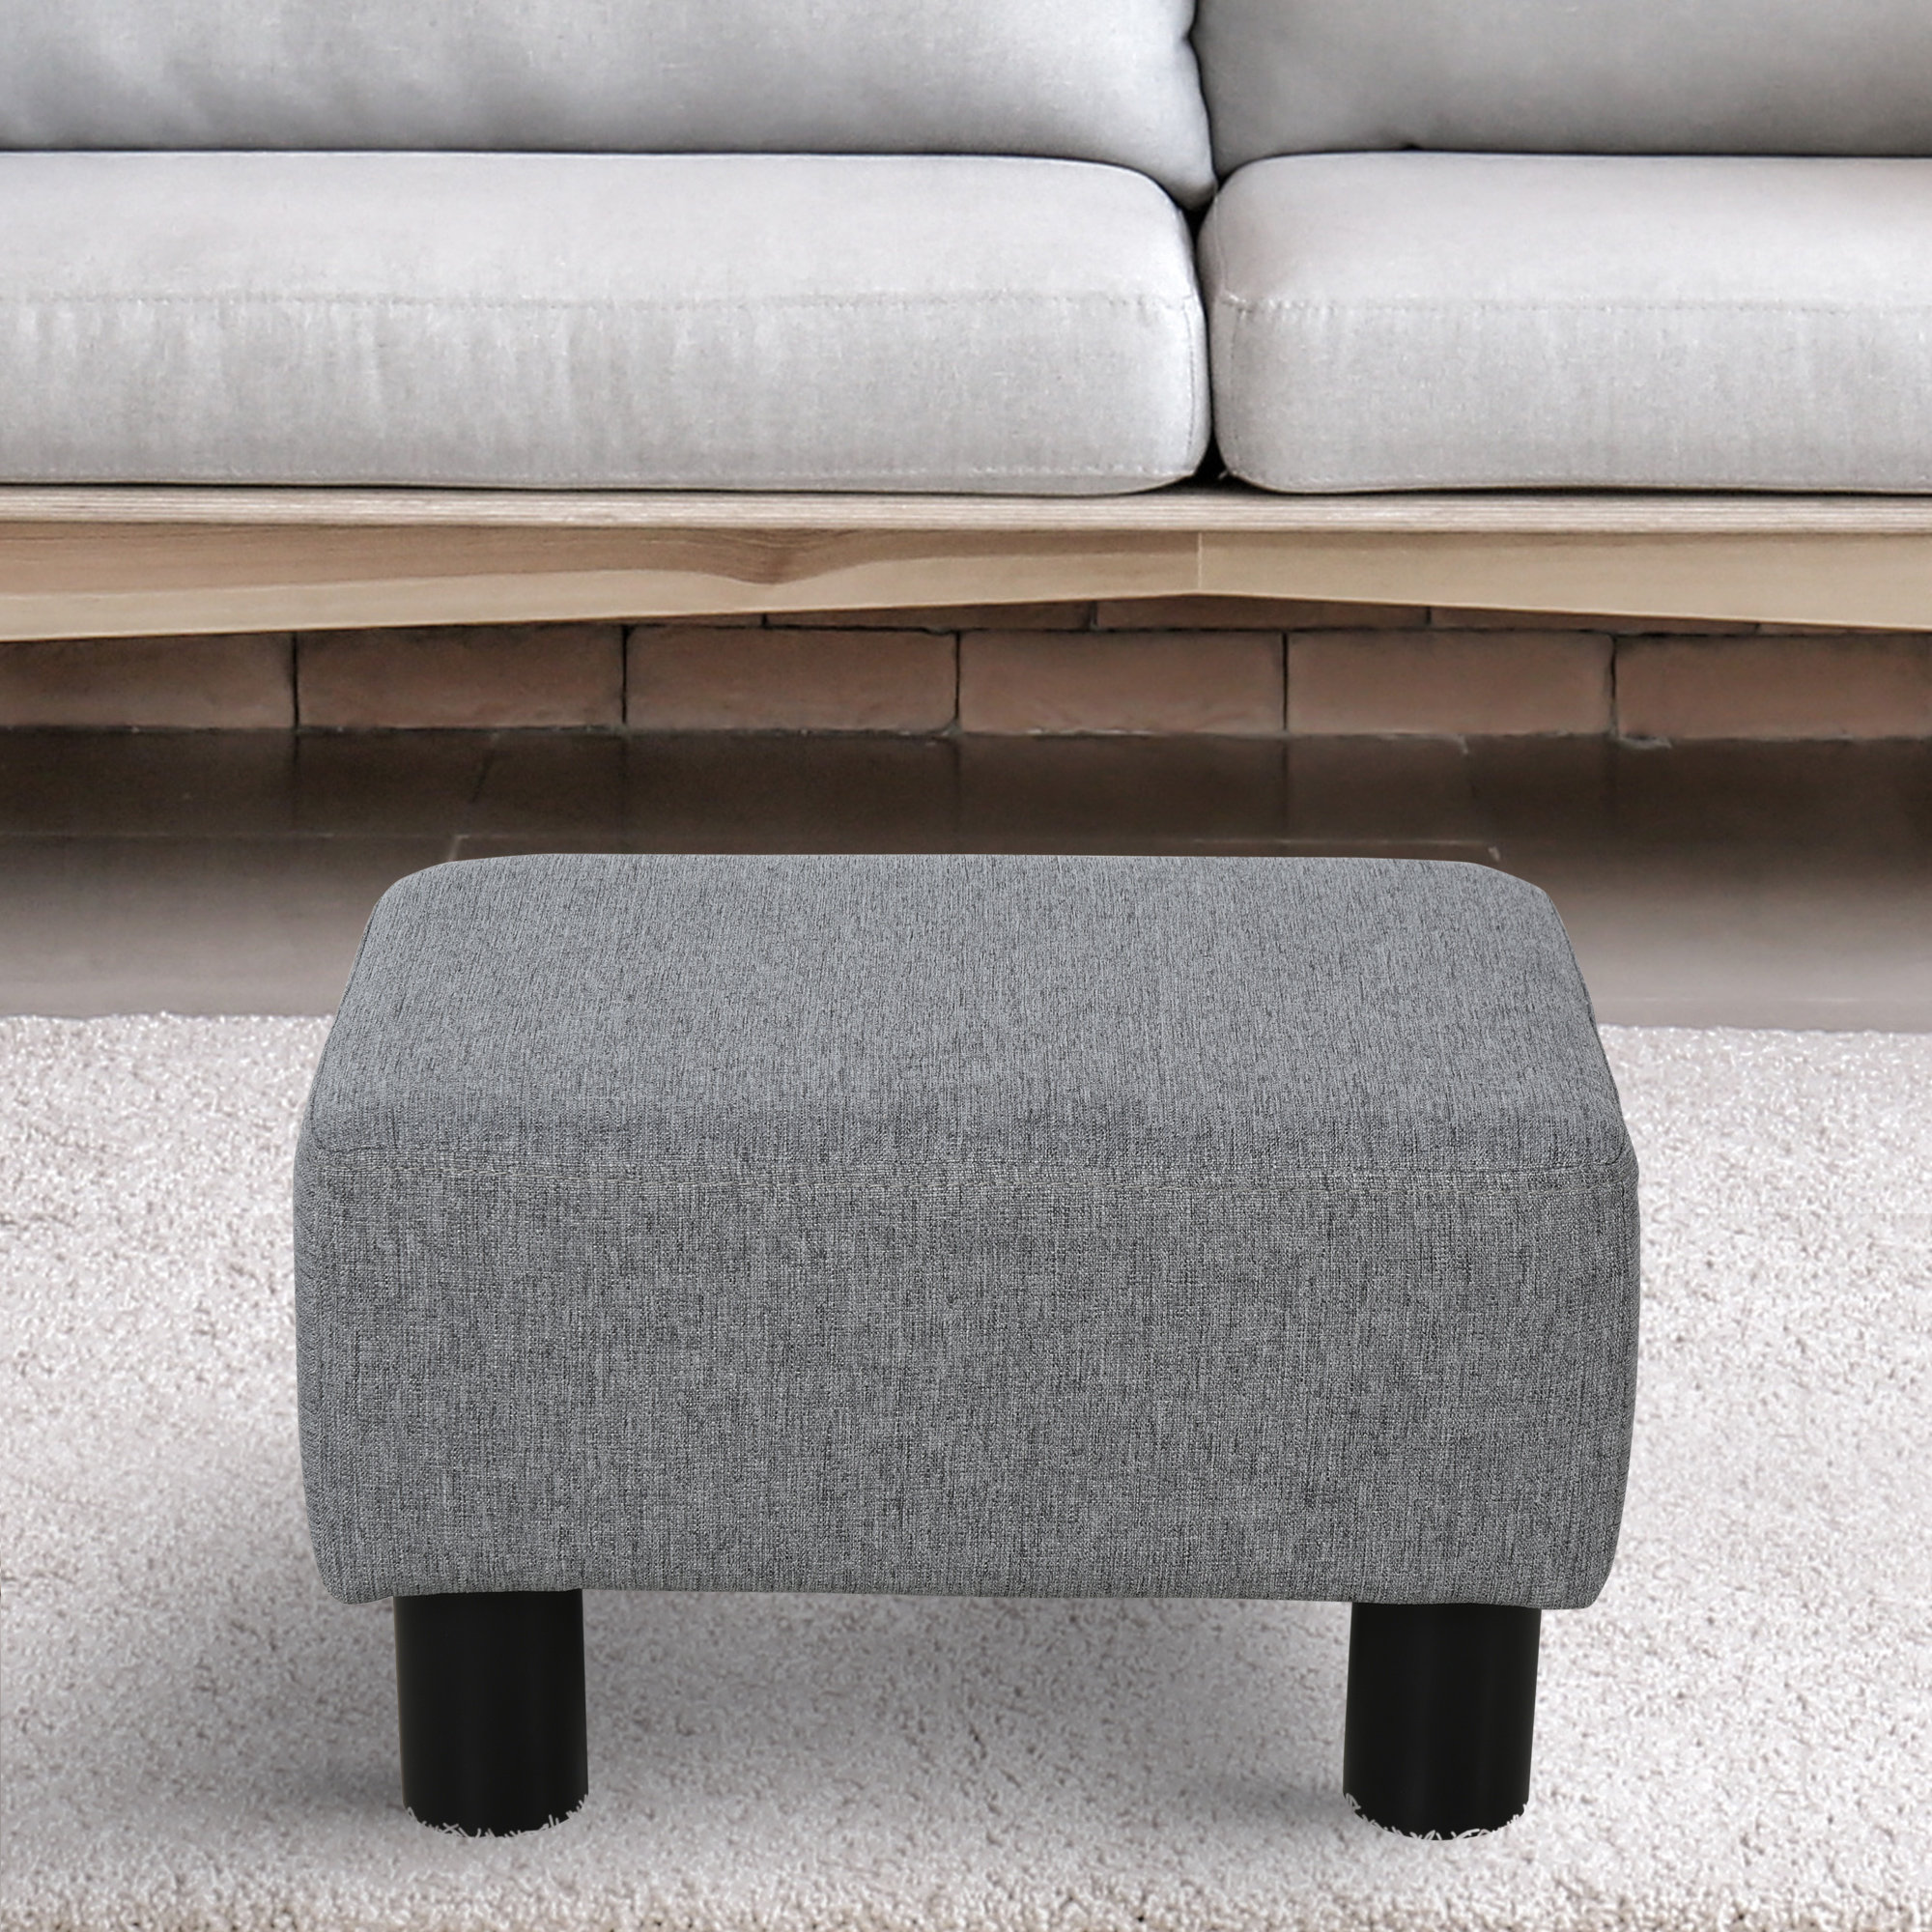 Comfort Ottoman Foot Rest Stool: Black Quality Pu Leather with  Handle,Pouffe Ottoman with Non-Skid Plastic Legs,Not Tipped  Over,Comfortable Sponge